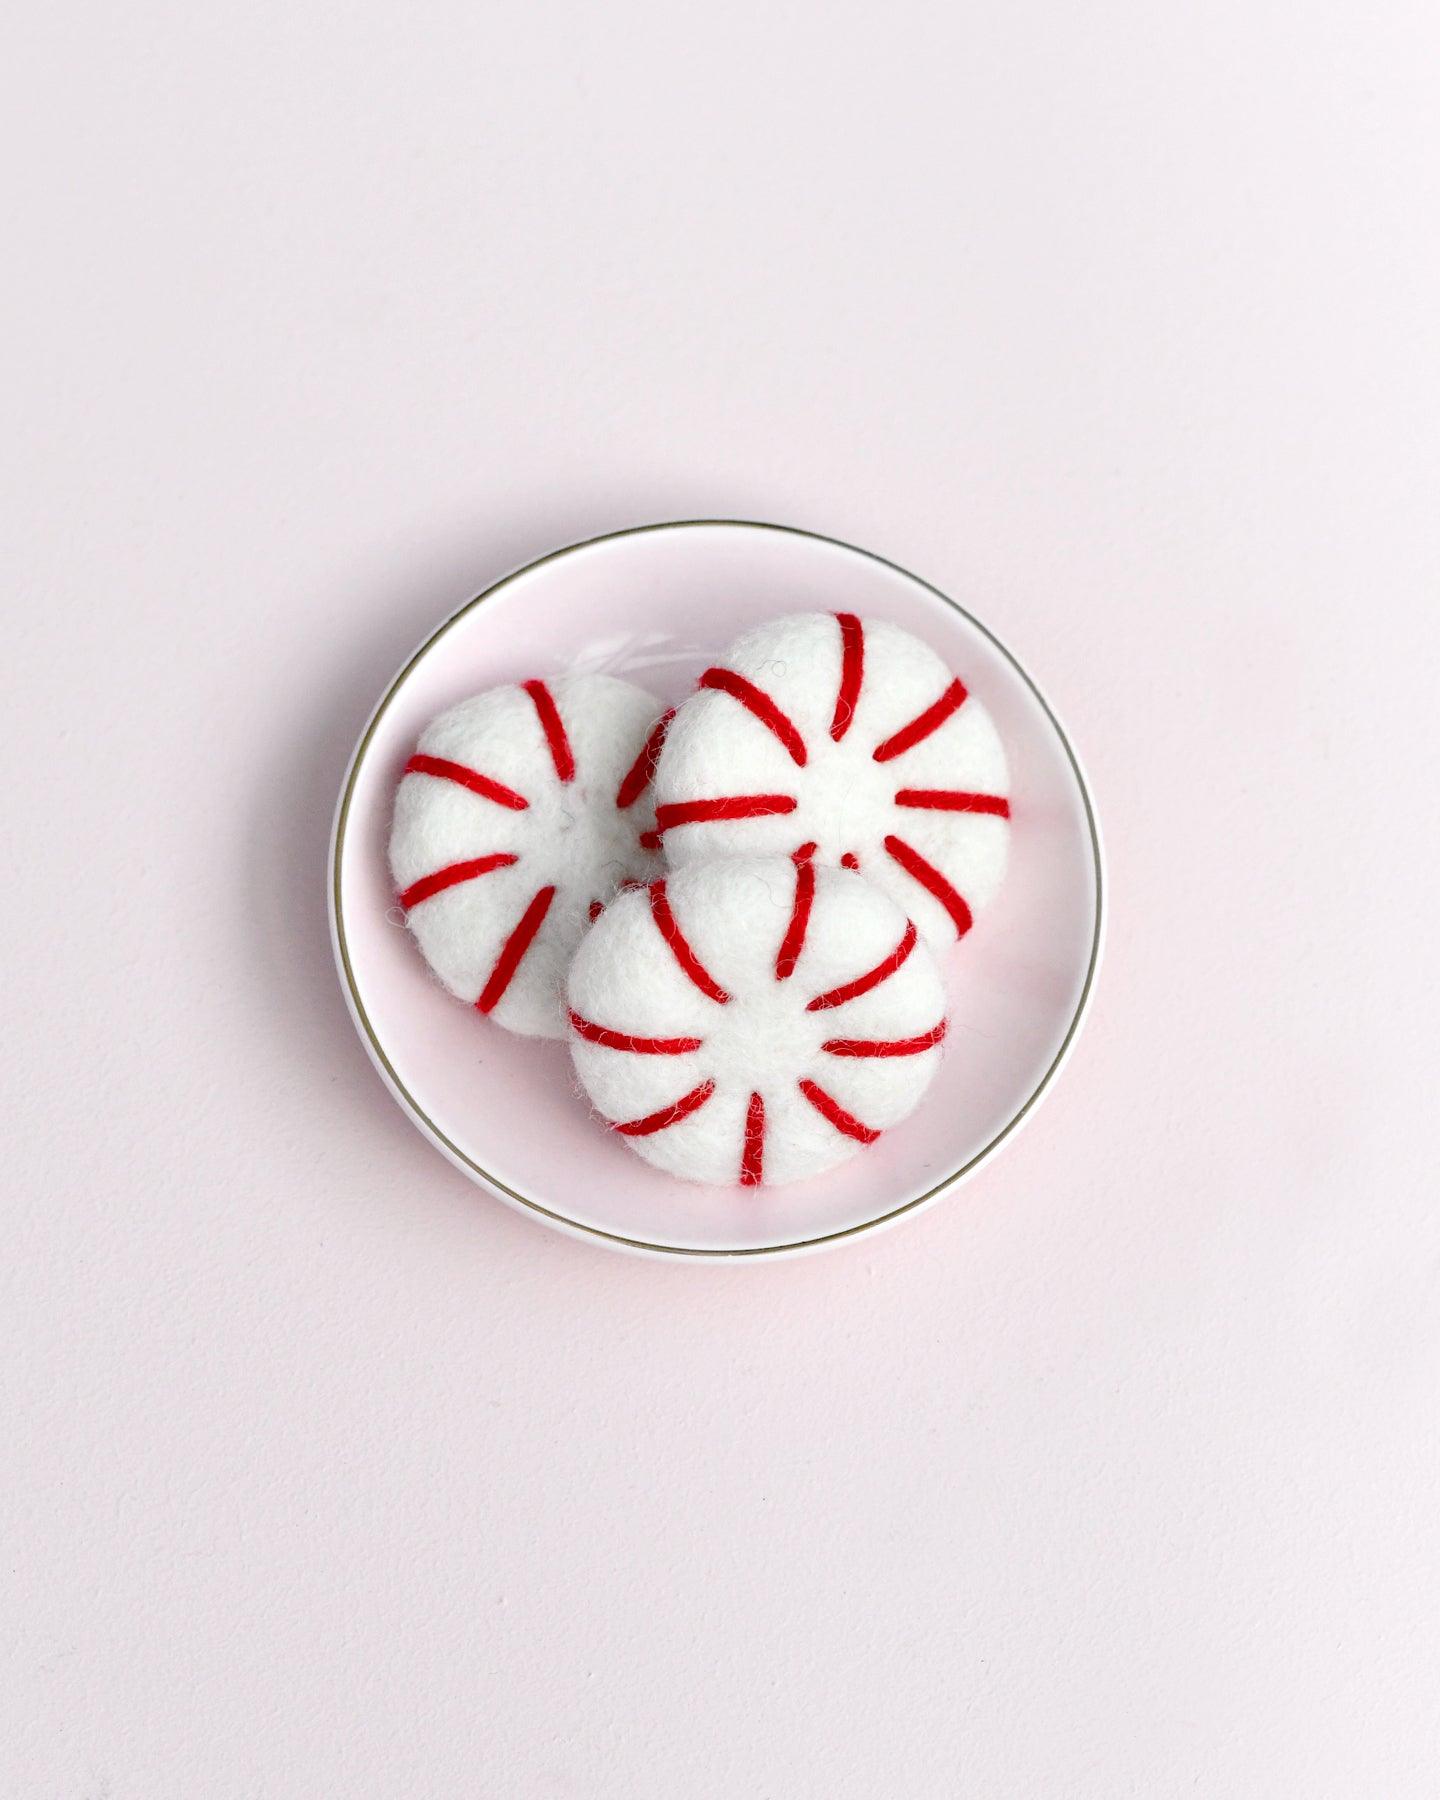 Felt Peppermint Candy Lollies (Red and White) - Set of 3